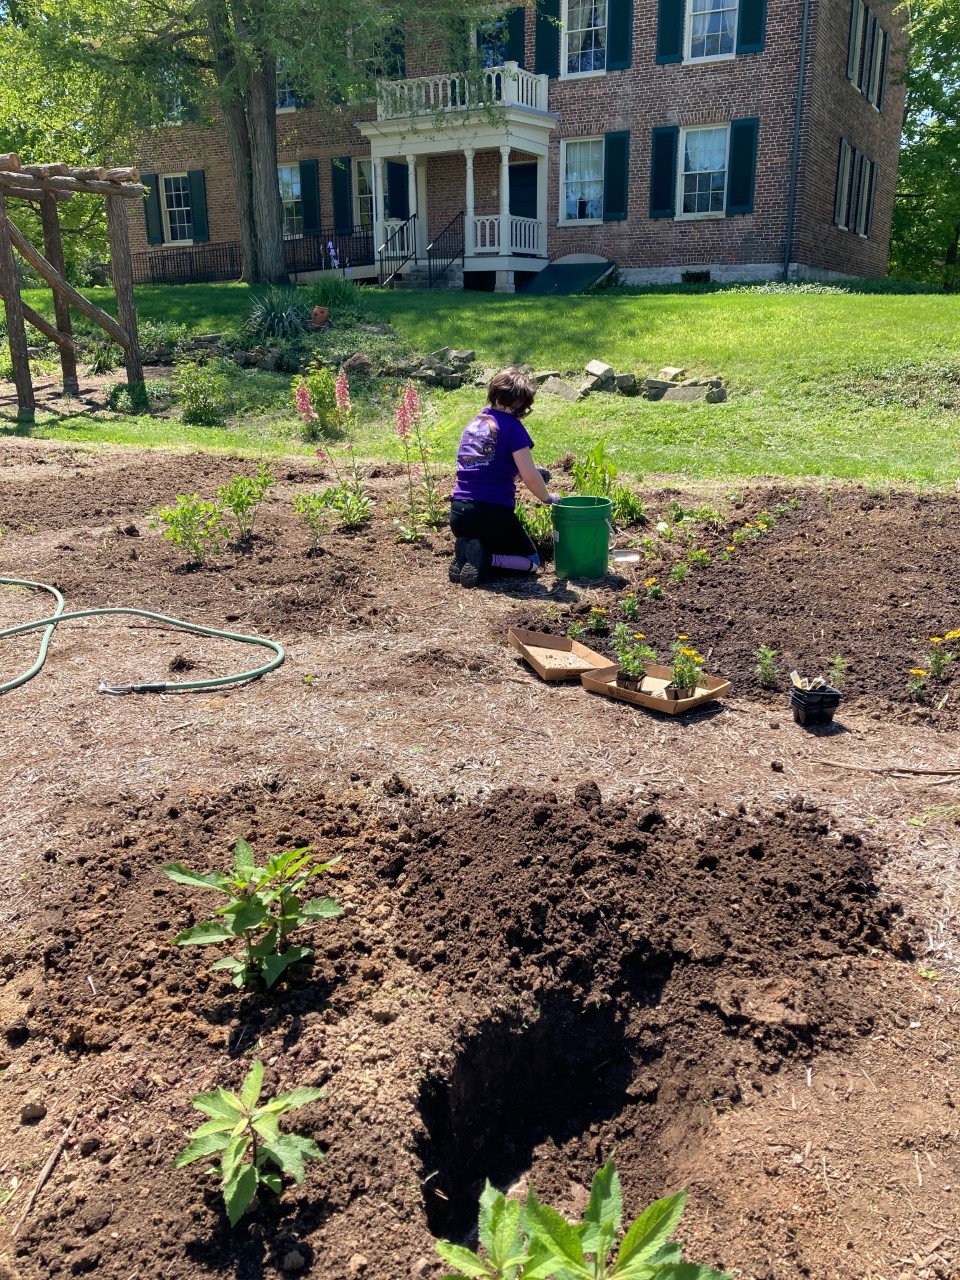 Outdoor dirt garden beds and a woman sitting on ground, working in a bed